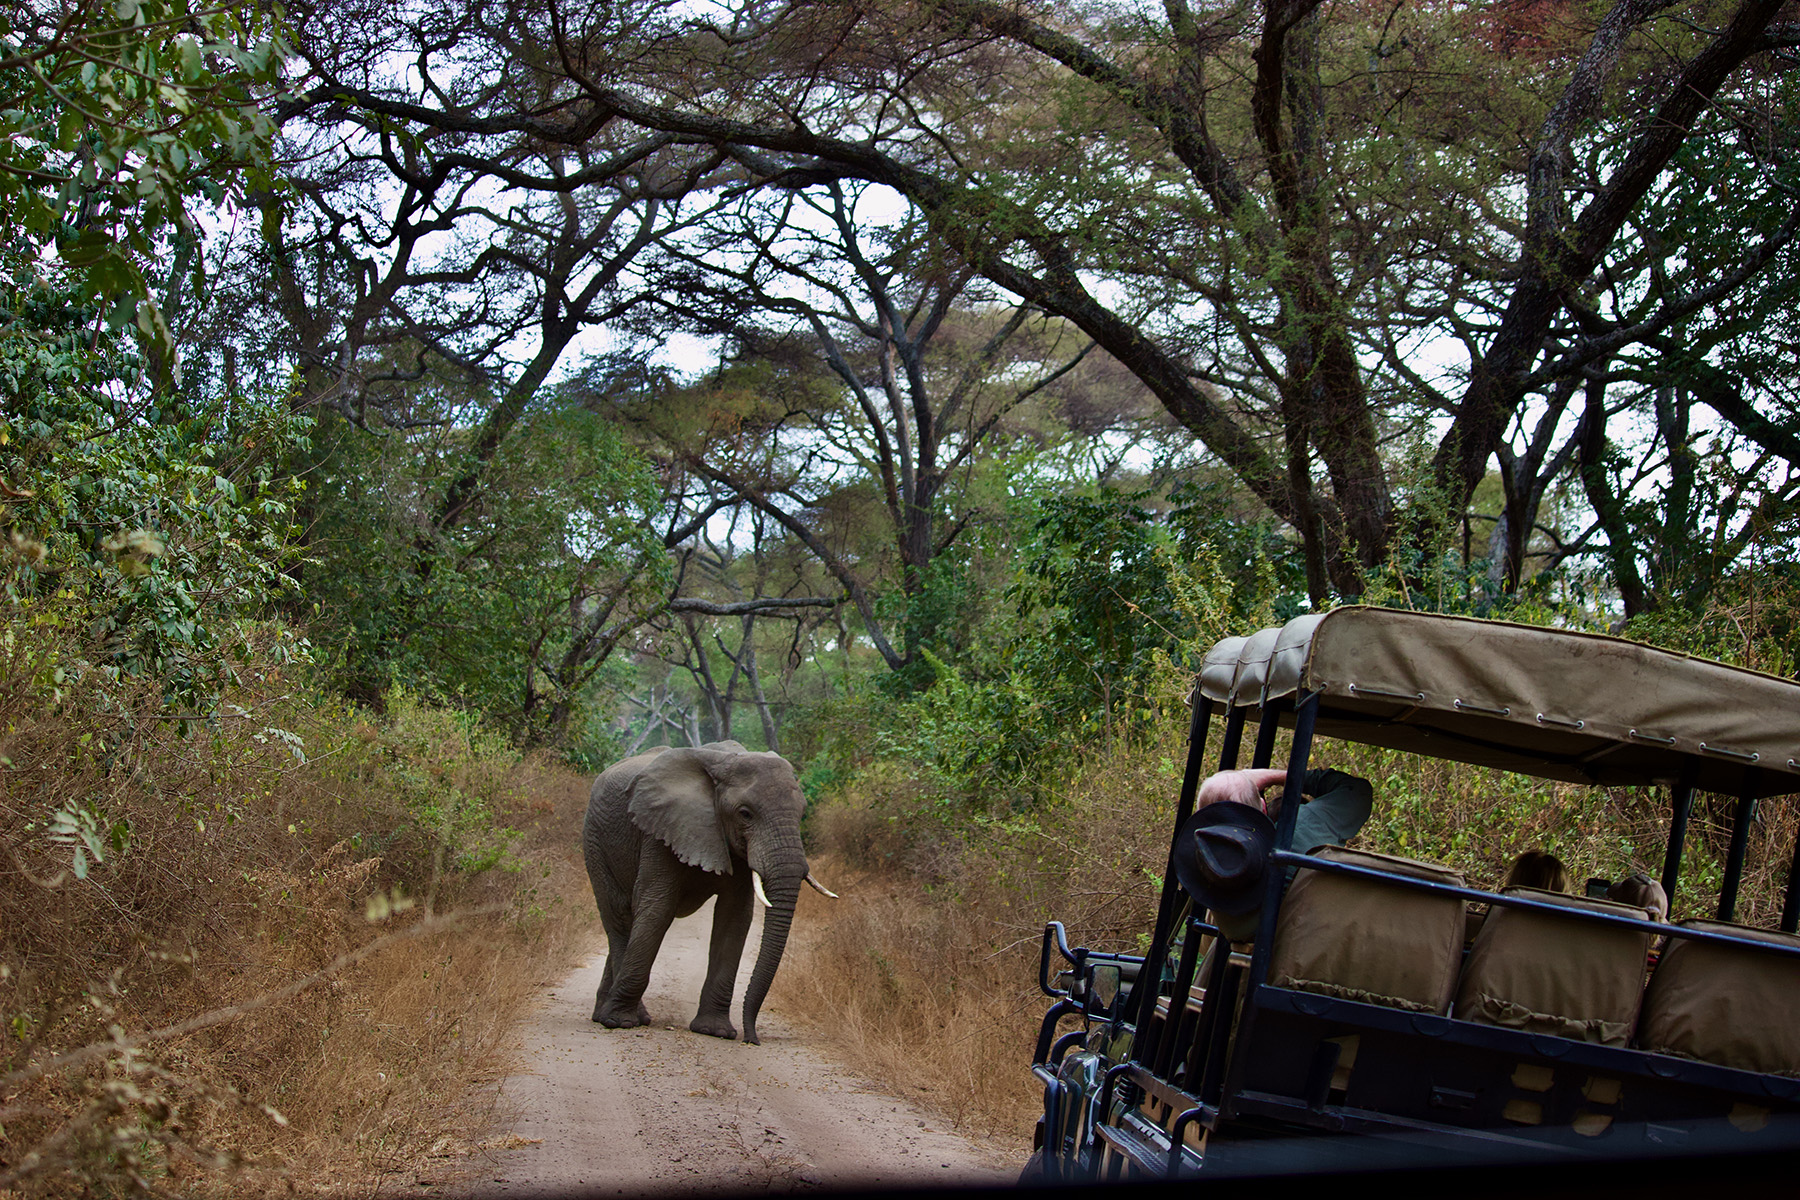 Objects are closer than they appear, Lake Manyara National Park, Tanzania, Africa